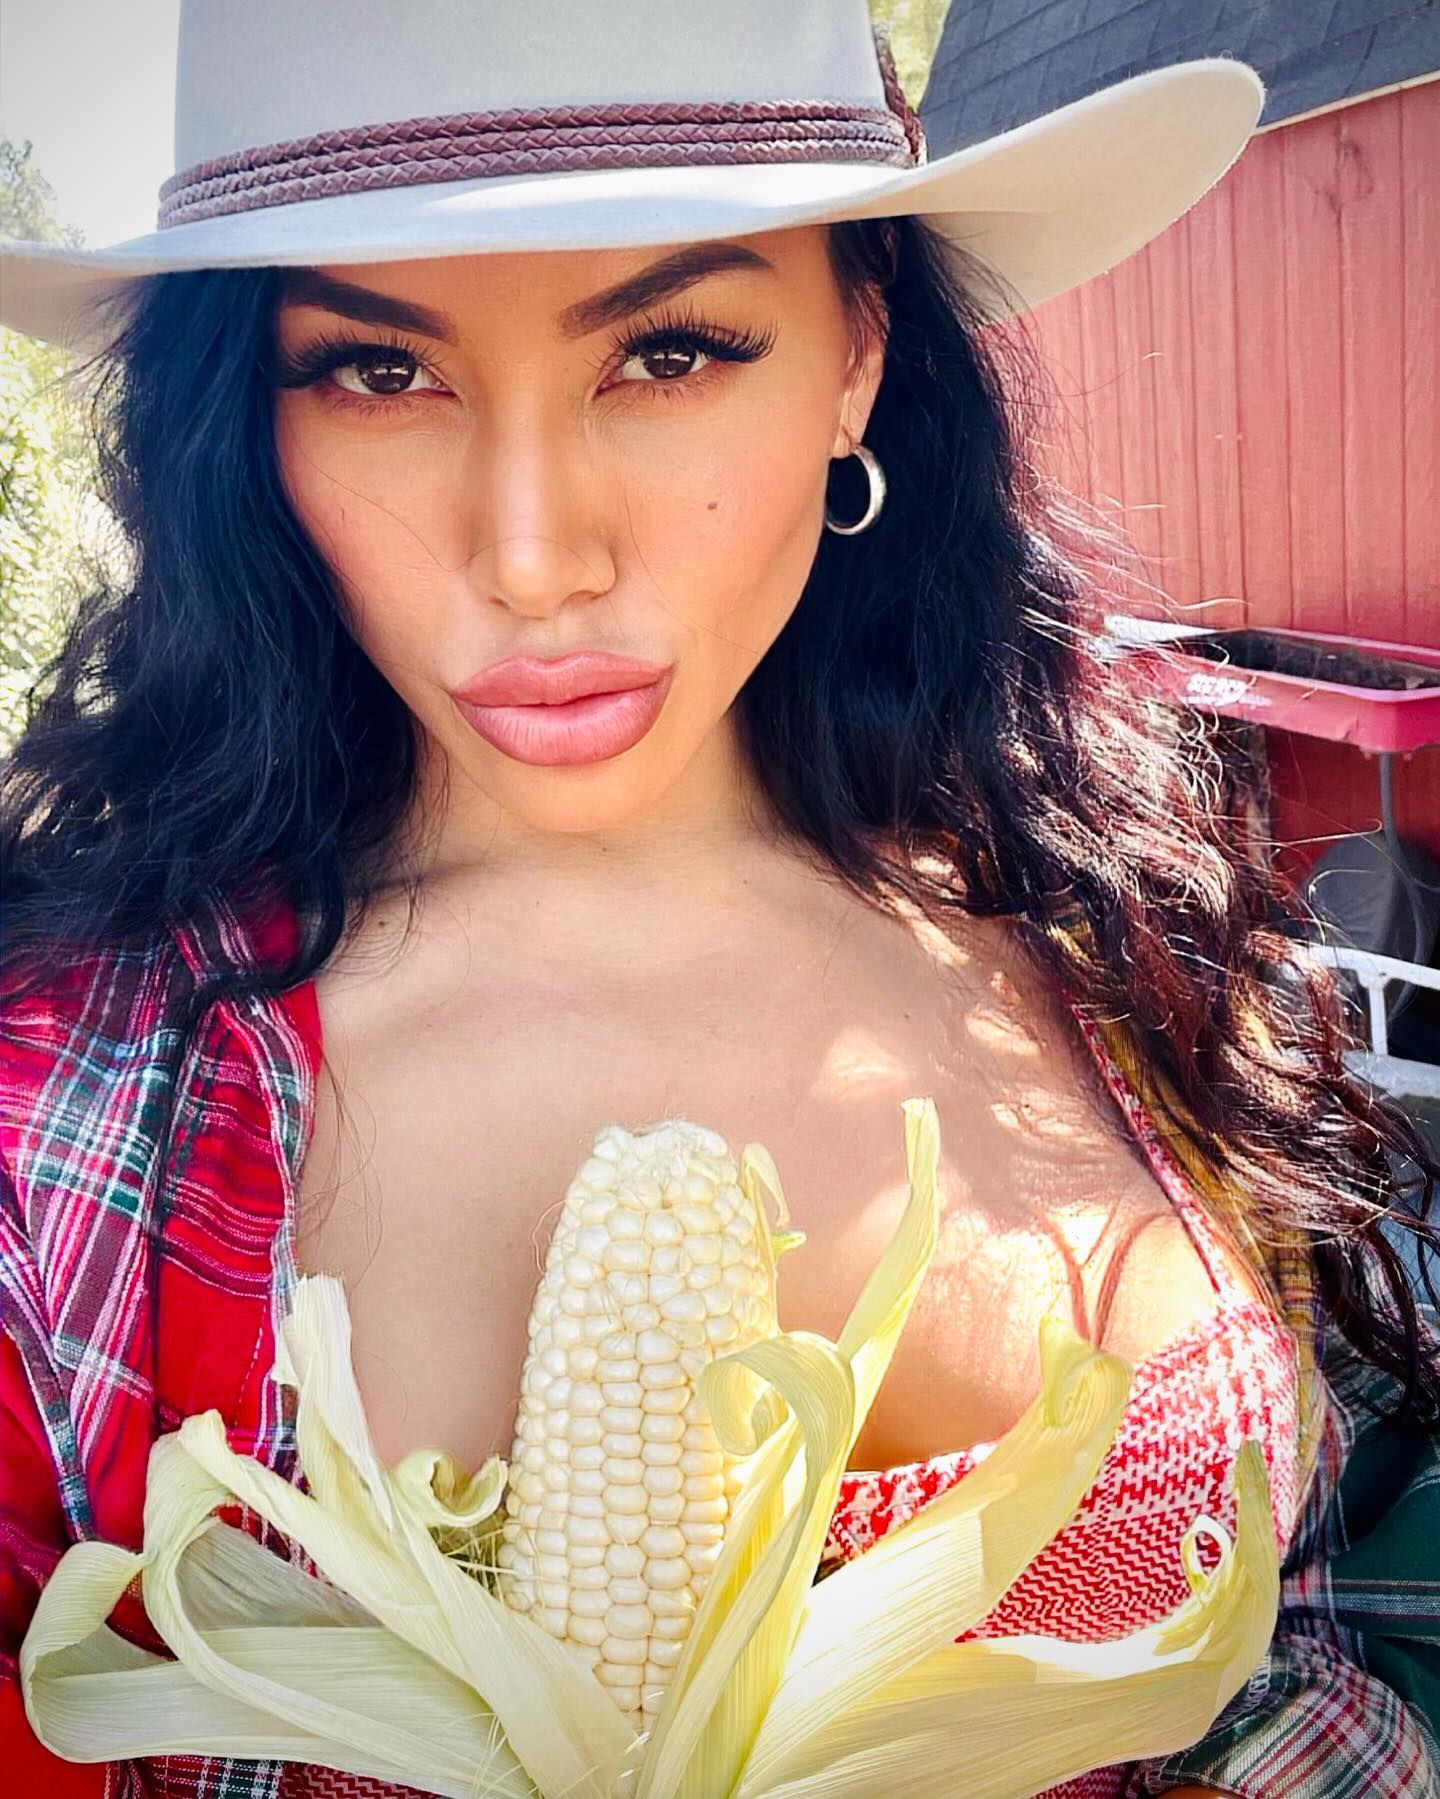 Yeehaw! Introducing my most recent character: Thelma, a tracker-riding corn farmer from the great state of _____________ , USA 👩🏻‍🌾🌽